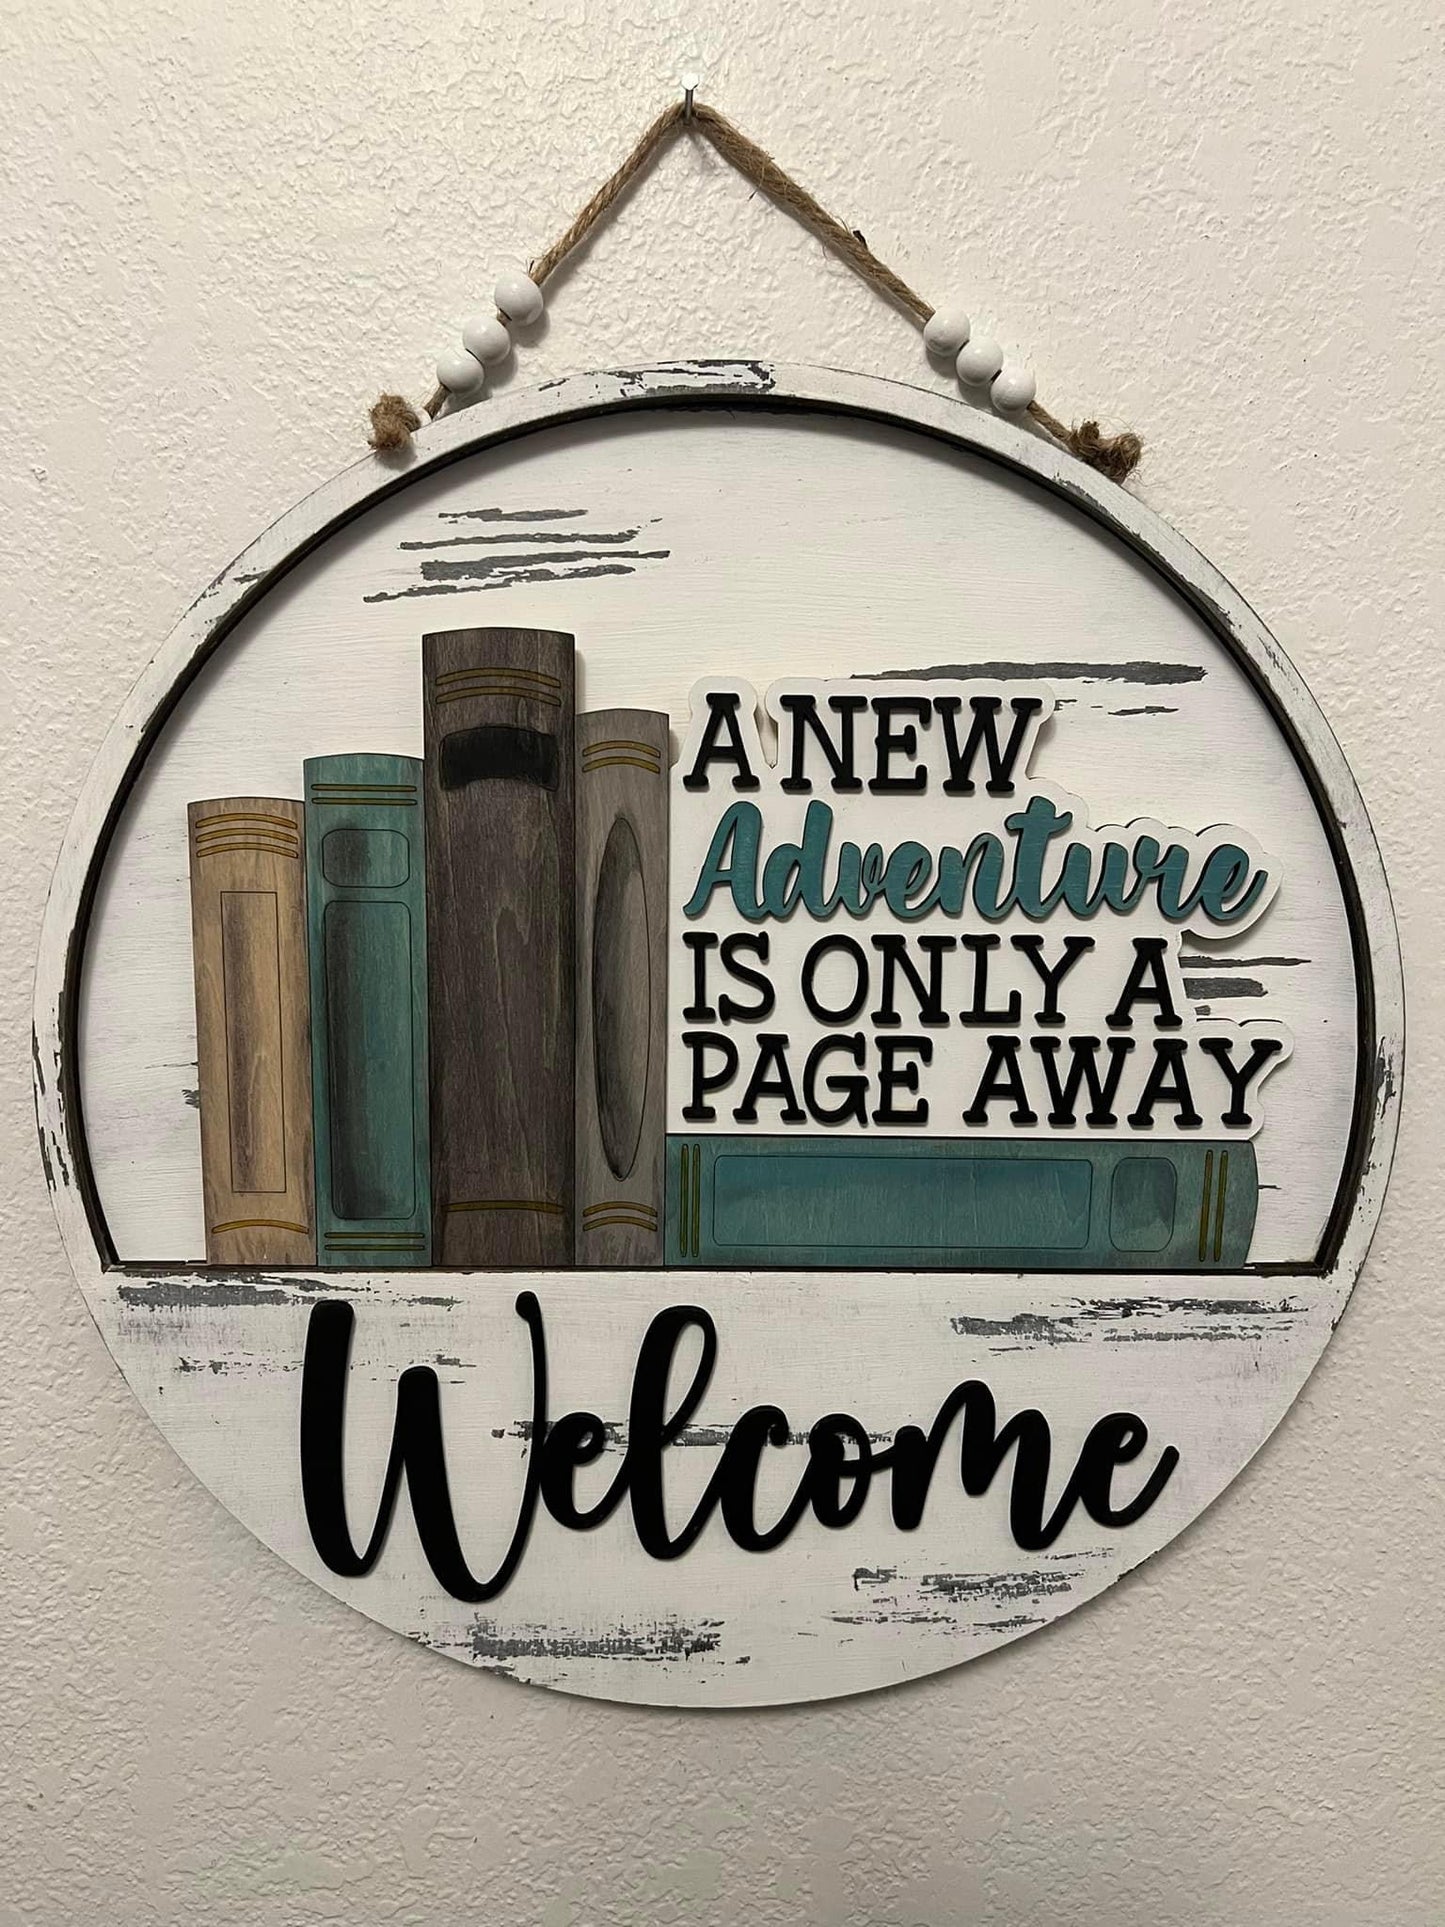 Interchangeable Welcome Door Hanger + A New Adventure is Only A Page Away(Books) add-on insert